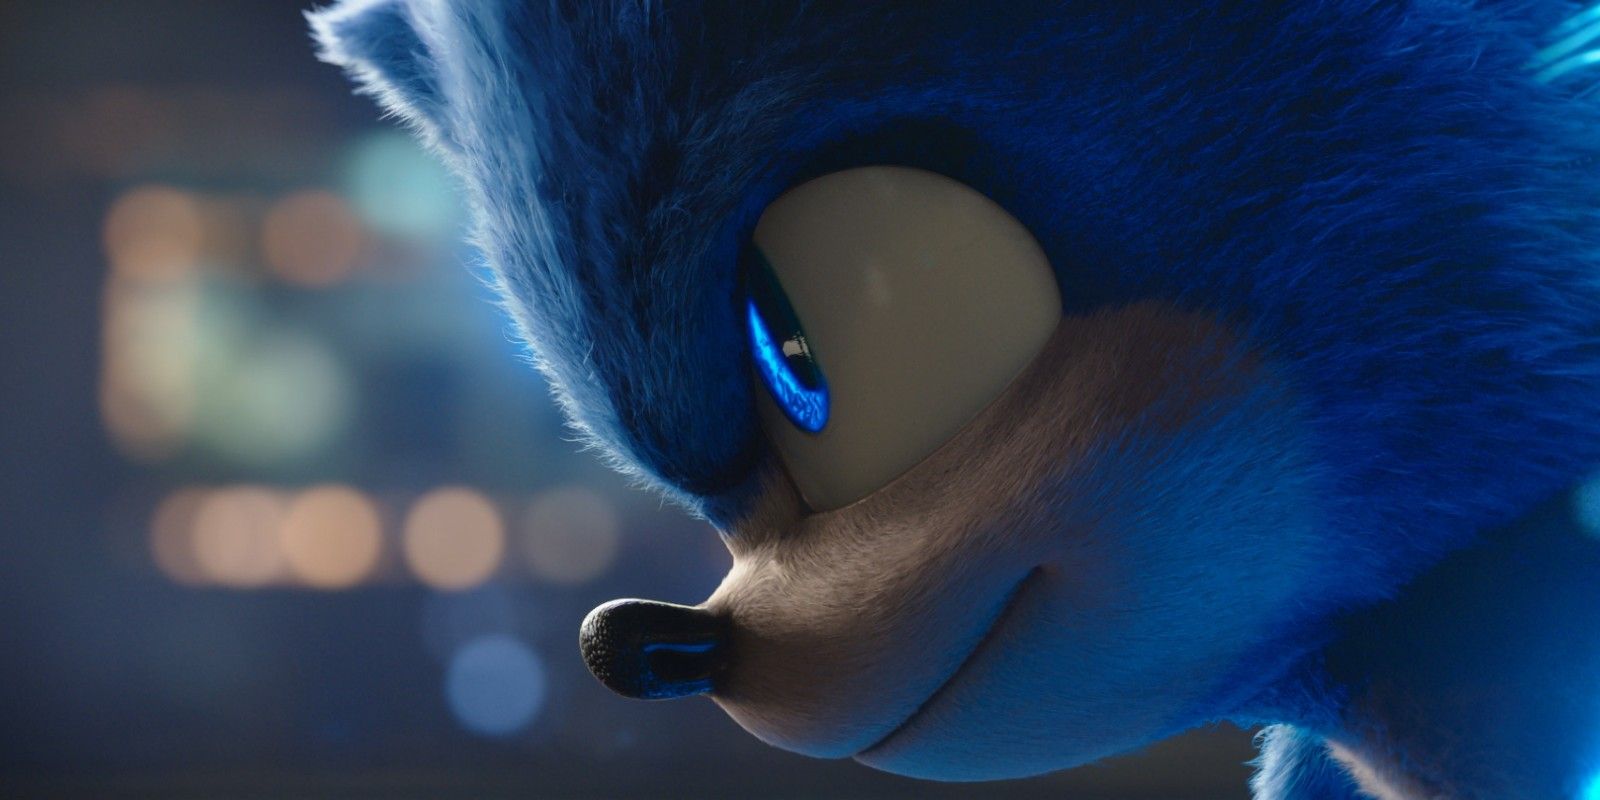 What To Expect From Sonic The Hedgehog 2